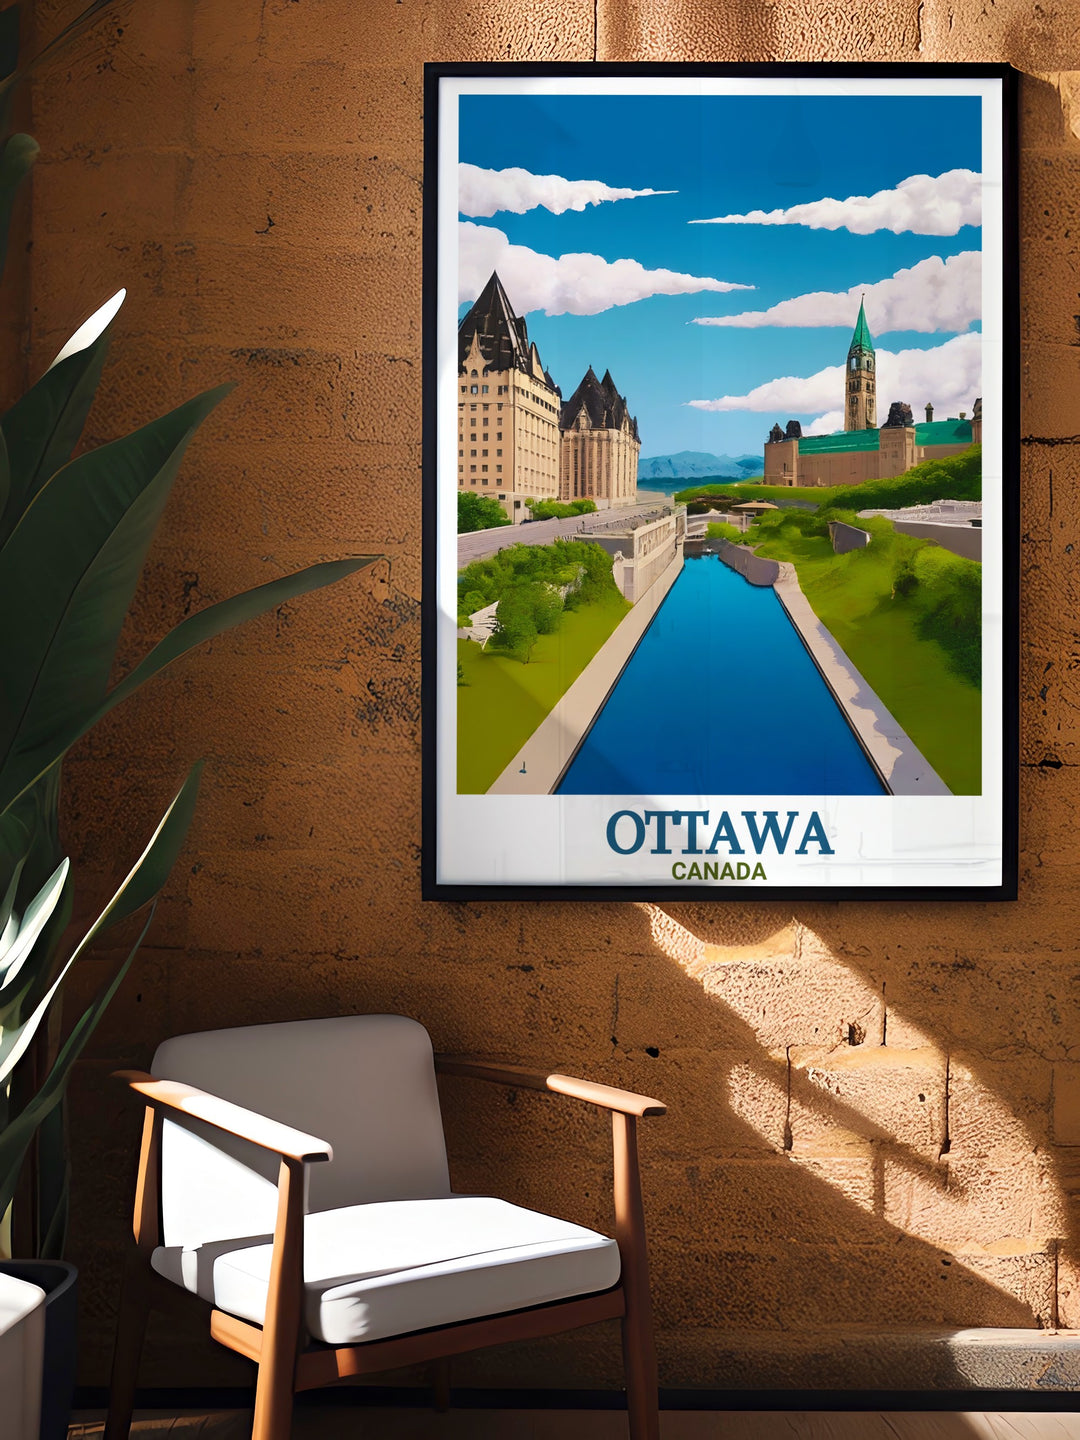 Ottawa Photo print featuring Rideau Canal and the citys skyline. This travel poster is perfect for those who appreciate photography and the beauty of Ottawas iconic landmarks providing a captivating view of Rideau Canal.